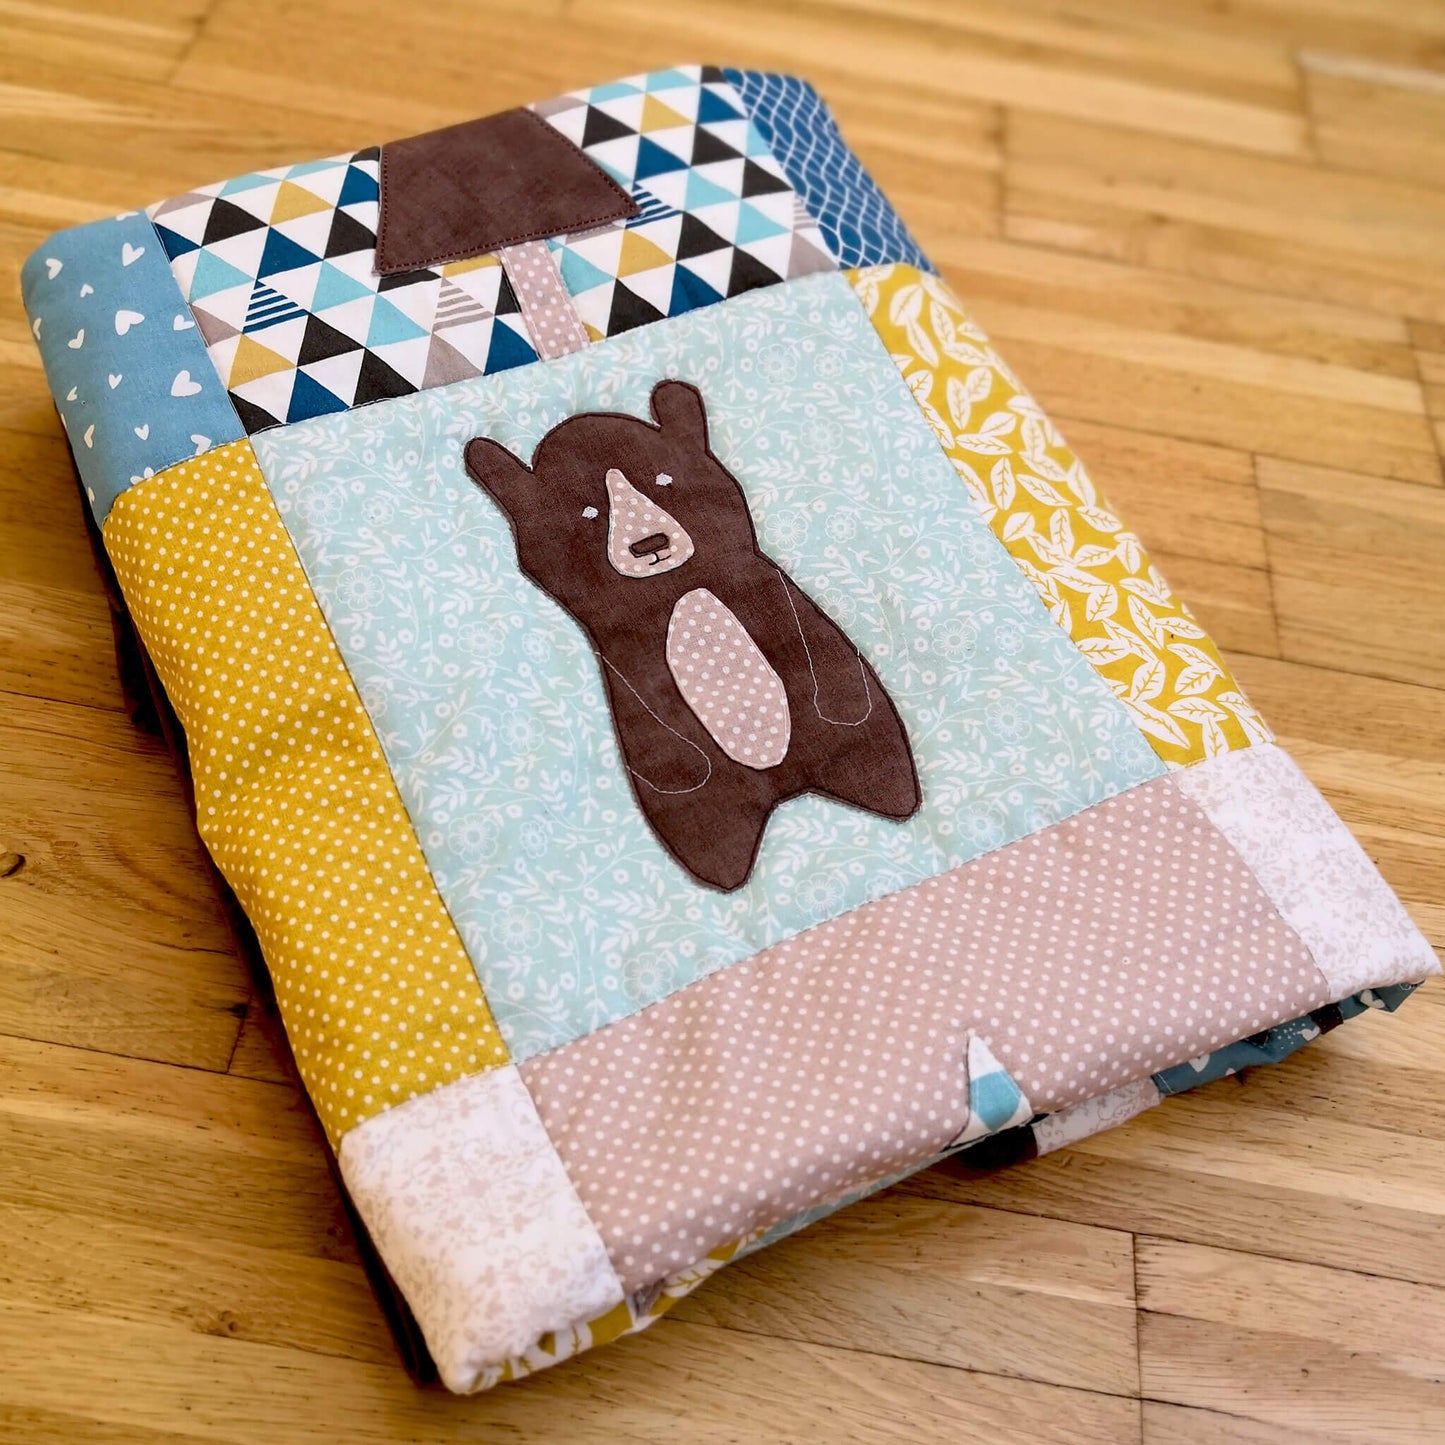 Cute bear appliqued on Our forest winter quilt